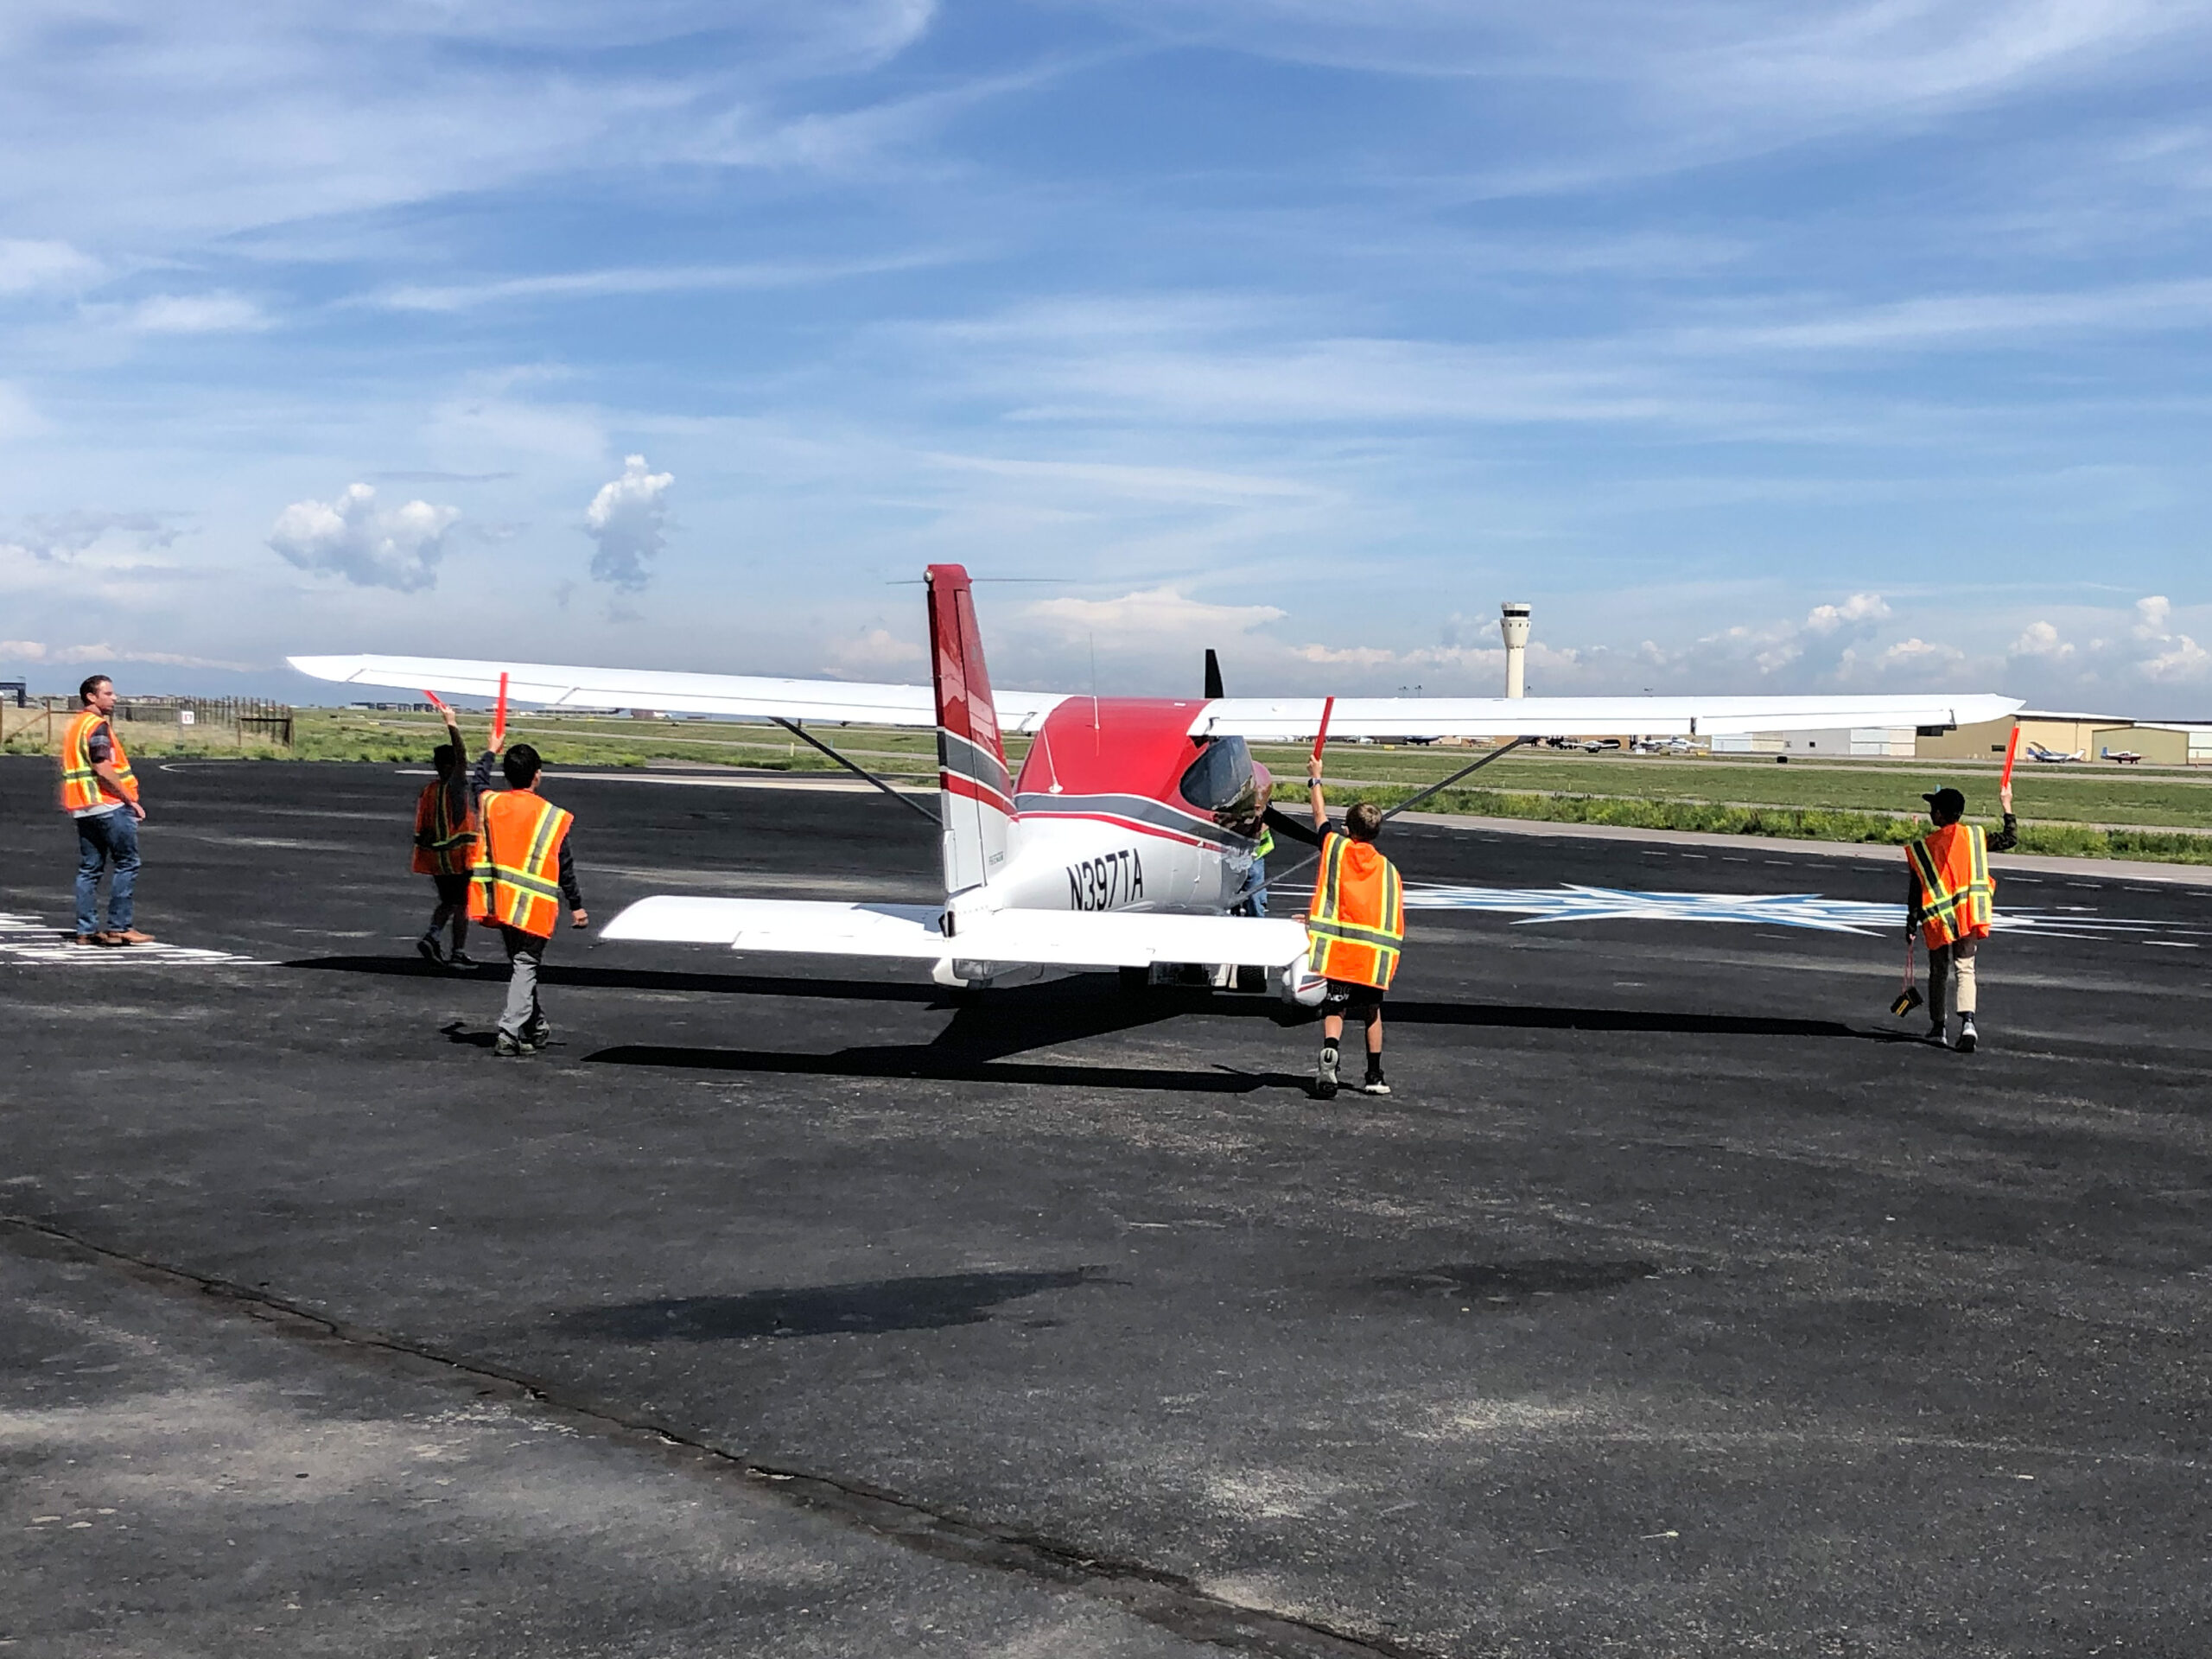 Students guiding a plane on the ramp